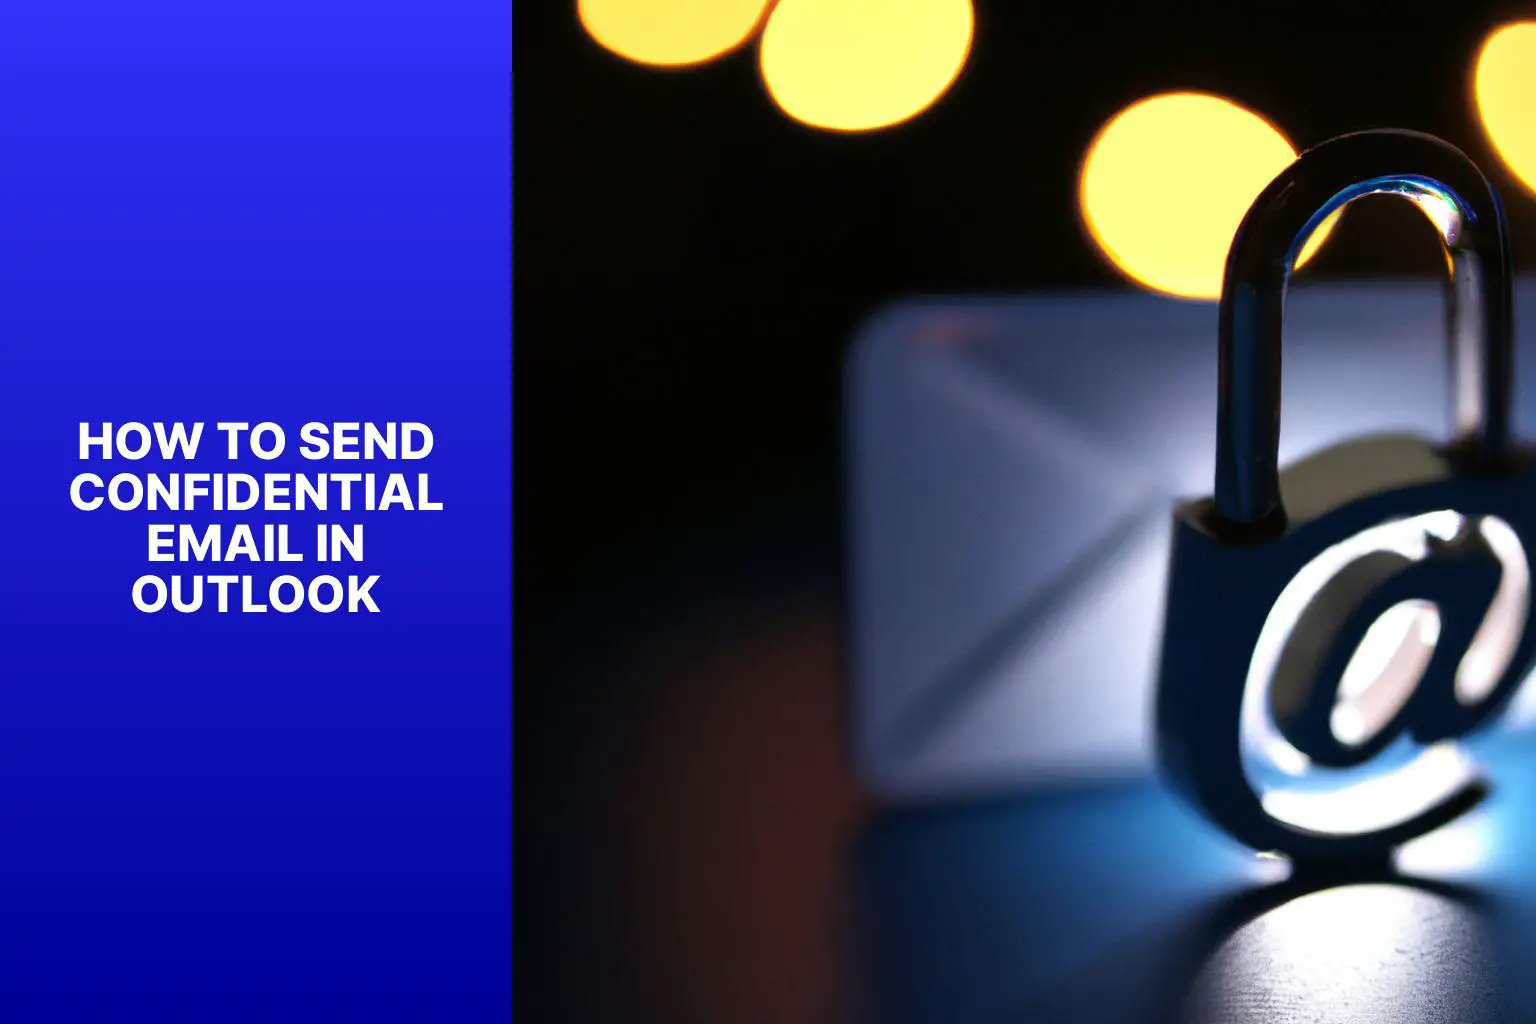 Send confidential email how to send confidential email in outlook604r